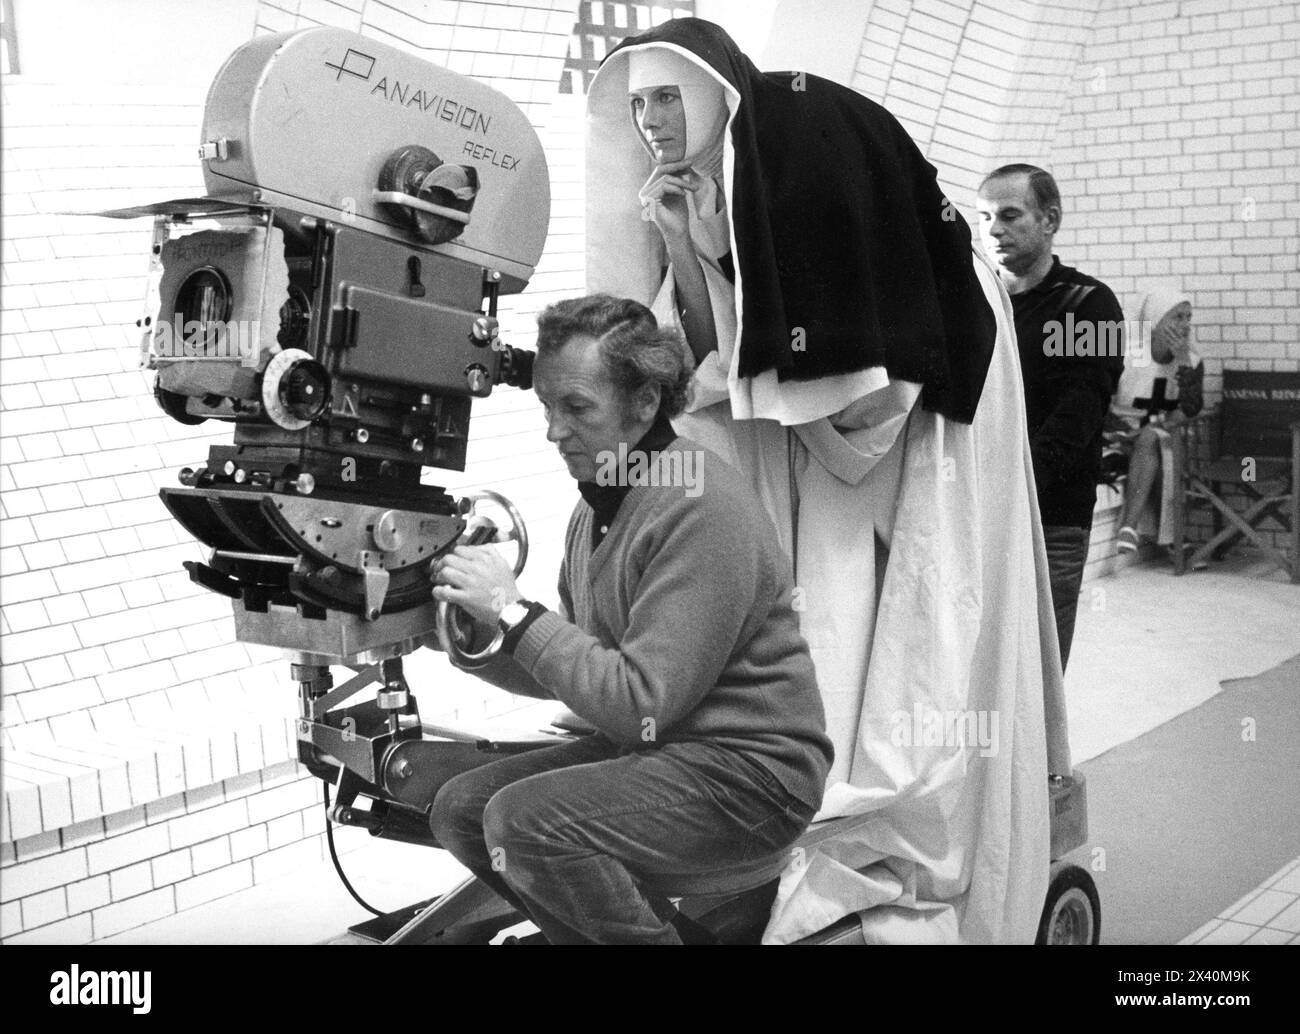 British actress VANESSA REDGRAVE  on the set of THE DEVILS 1971 Director KEN RUSSELL Novel ALDOUS HUXLEY  Production Design DEREK JARMAN Costume Design SHIRLEY RUSSELL Director of Photography DAVID WATKIN Russo Productions / Warner Brothers Stock Photo